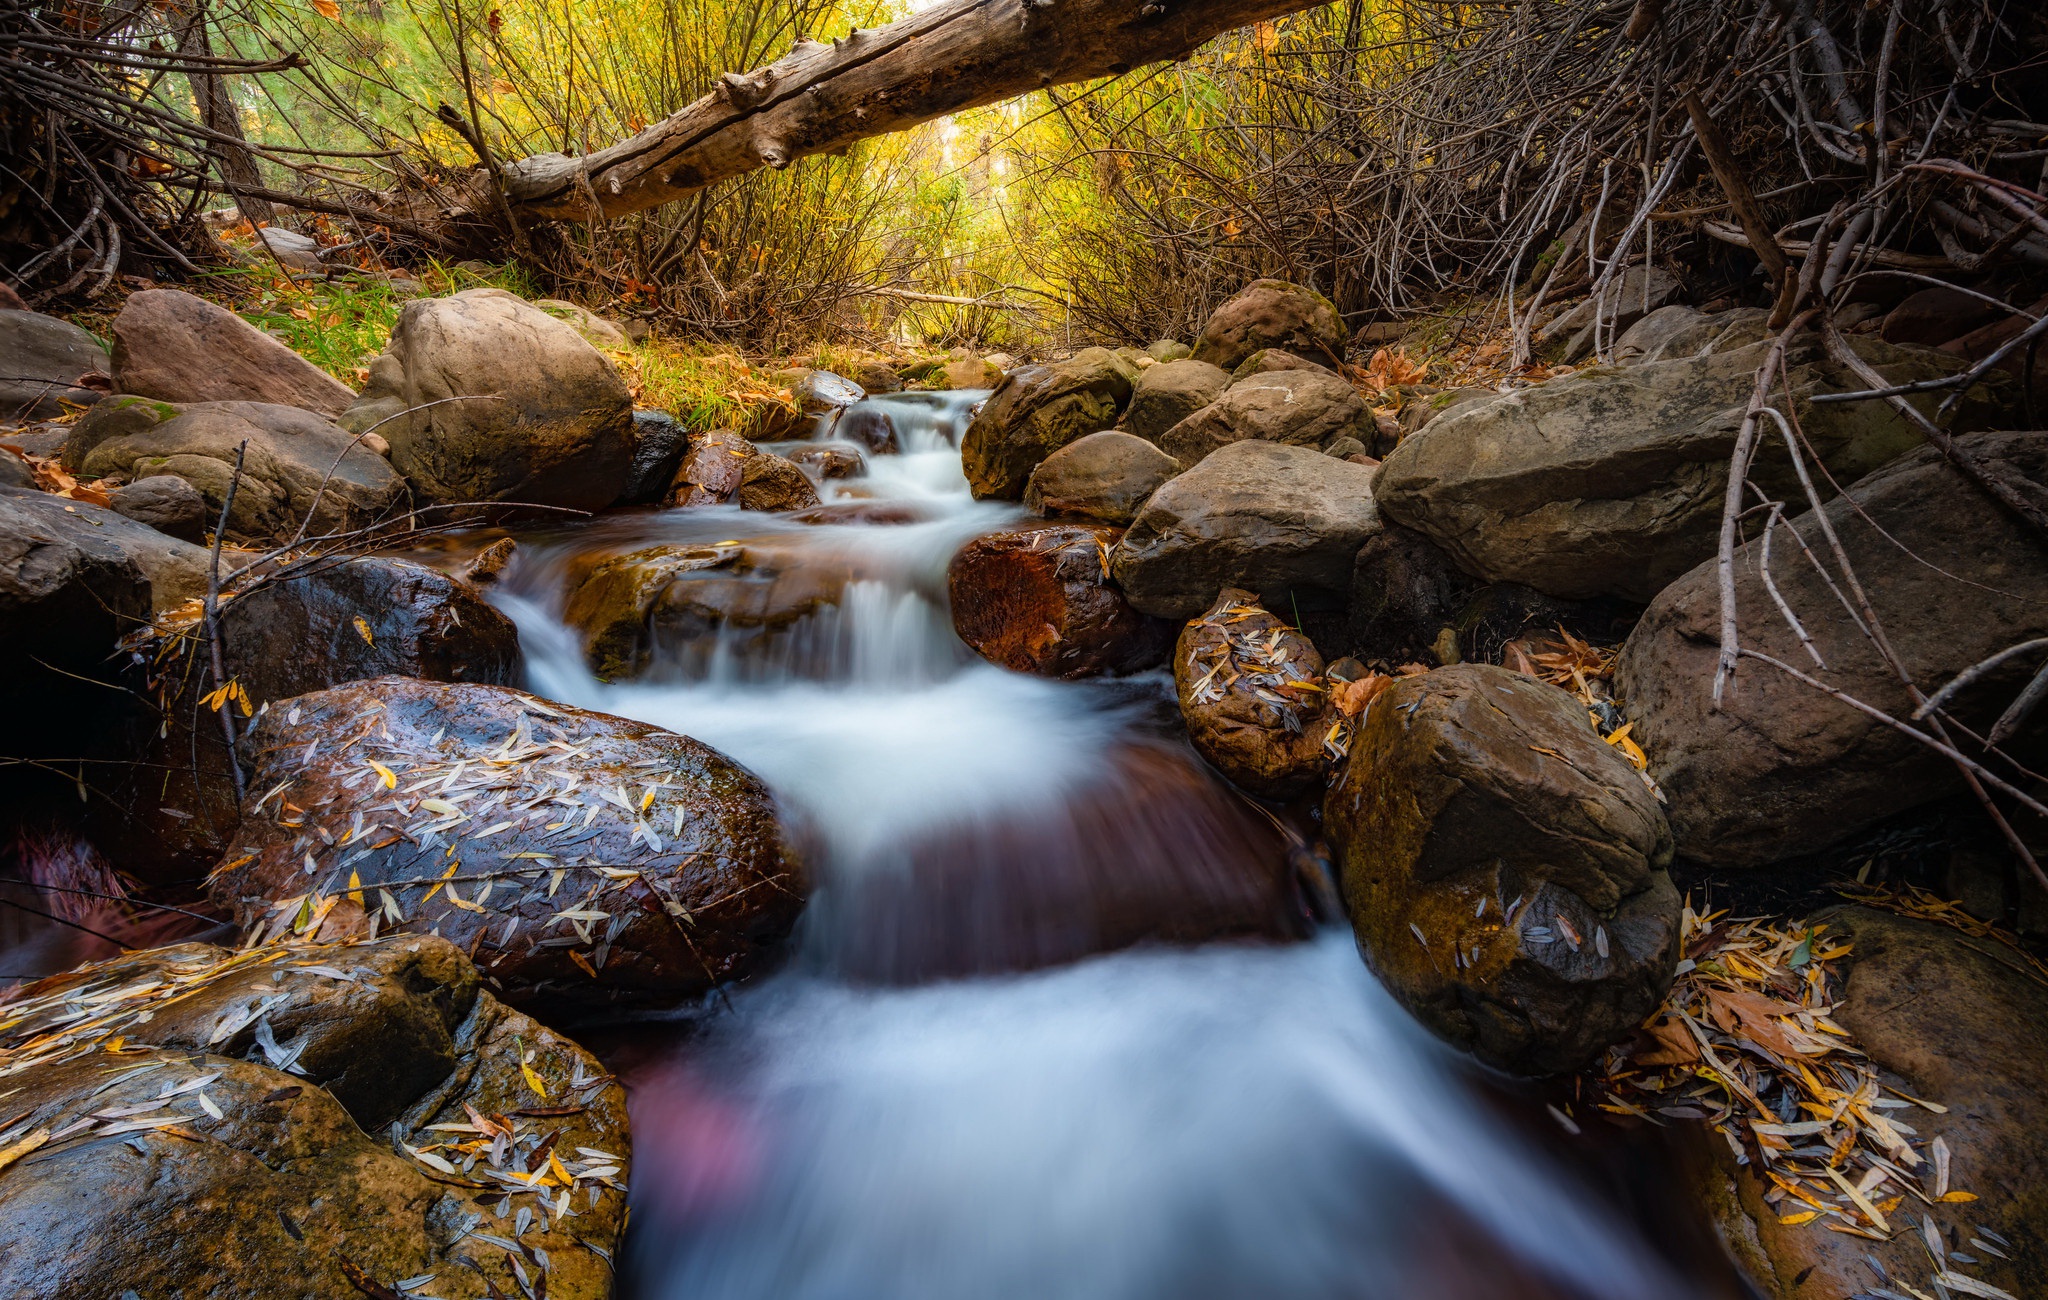 General 2048x1300 water stones nature fall outdoors